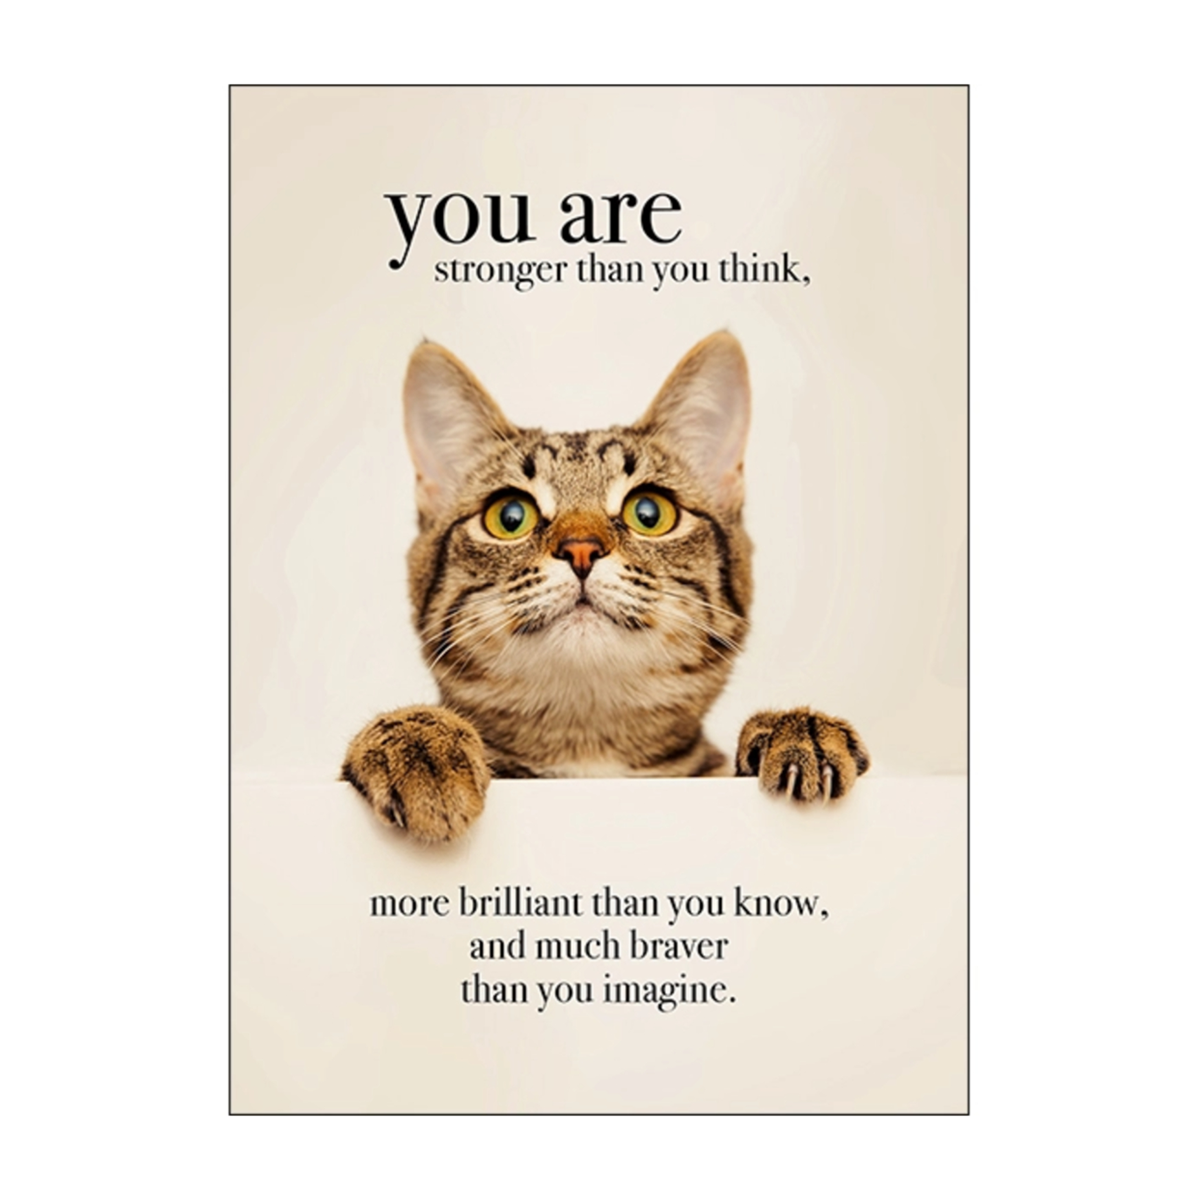 You Are Stronger Than You Think Encouragement Card